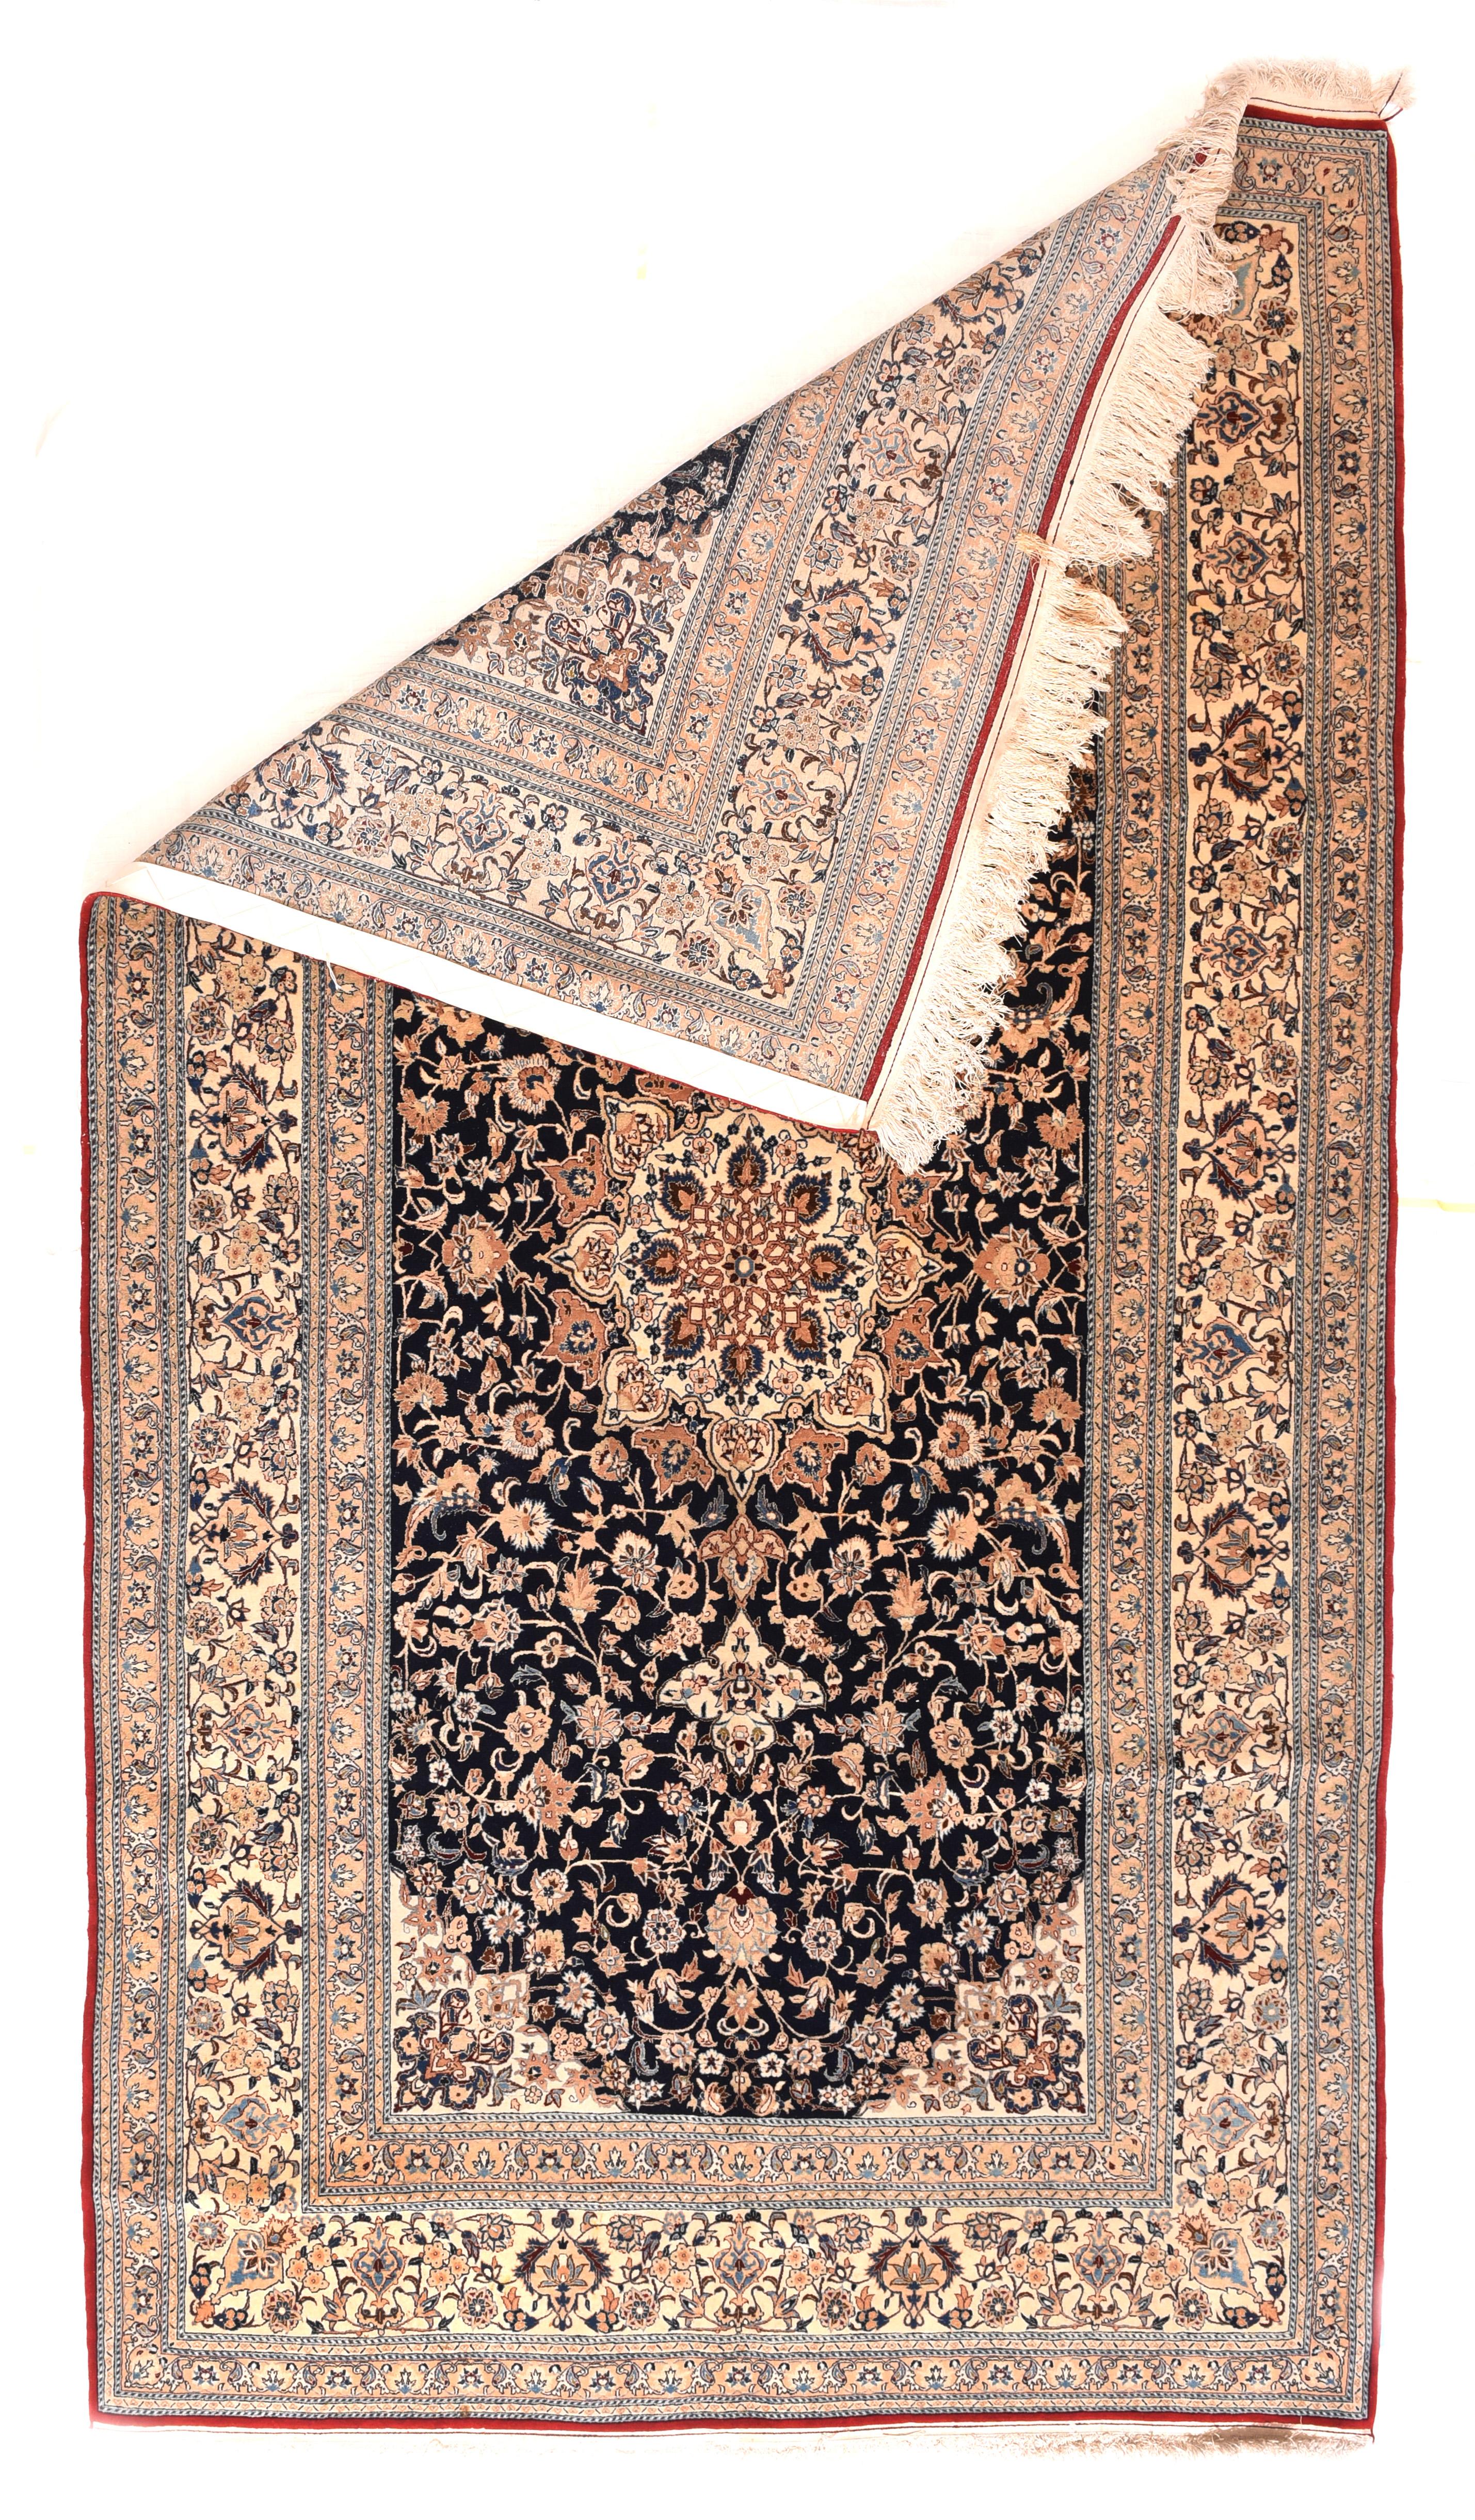 Nain rugs are constructed using the Persian knot and typically have between 300 and 700 knots per square inch. The pile is usually very high quality wool, clipped short, and silk is often used as highlighting for detail in the design.

Close to the